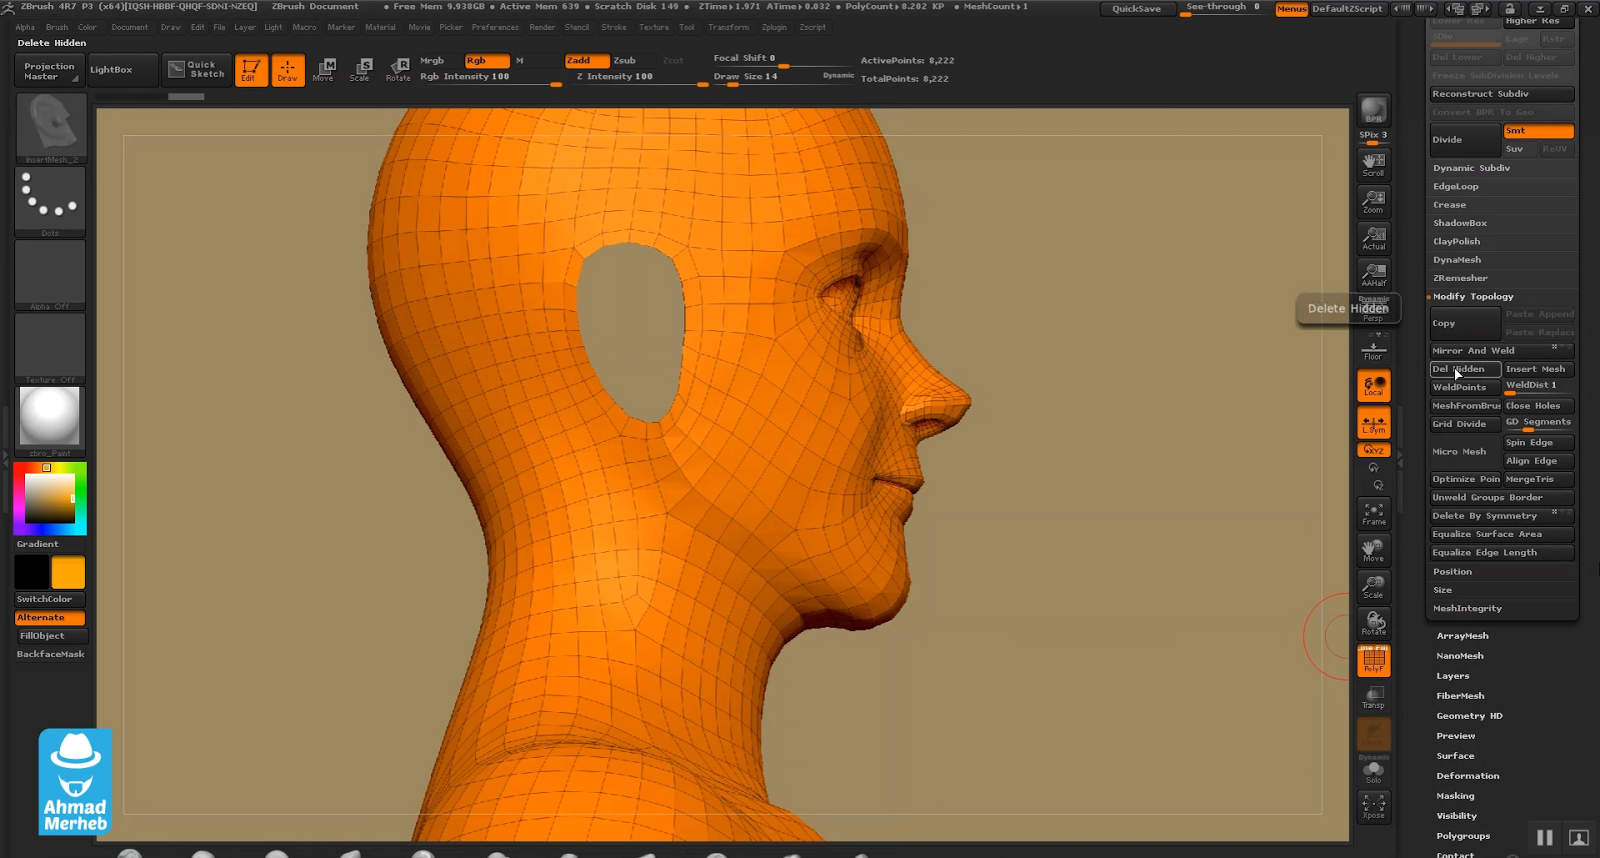 how to import mesh correct size into zbrush